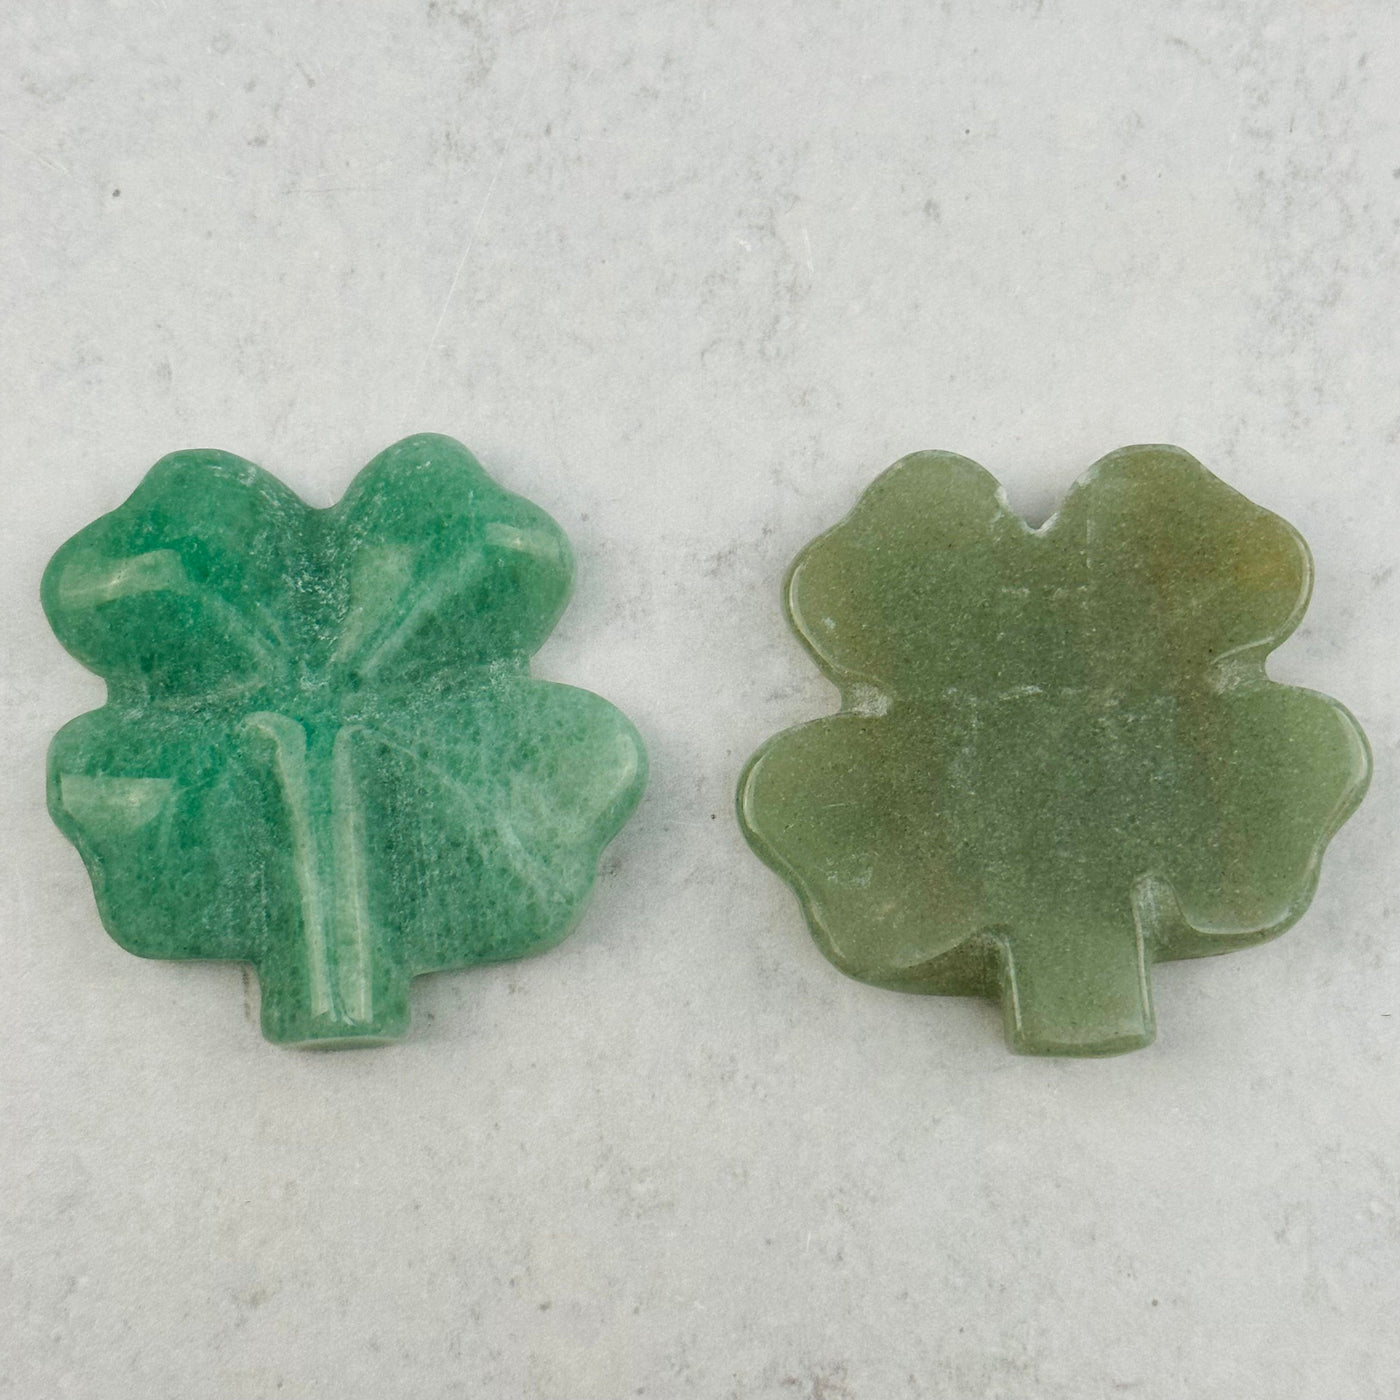 front and back view of the Green Aventurine Carved Gemstone Clovers